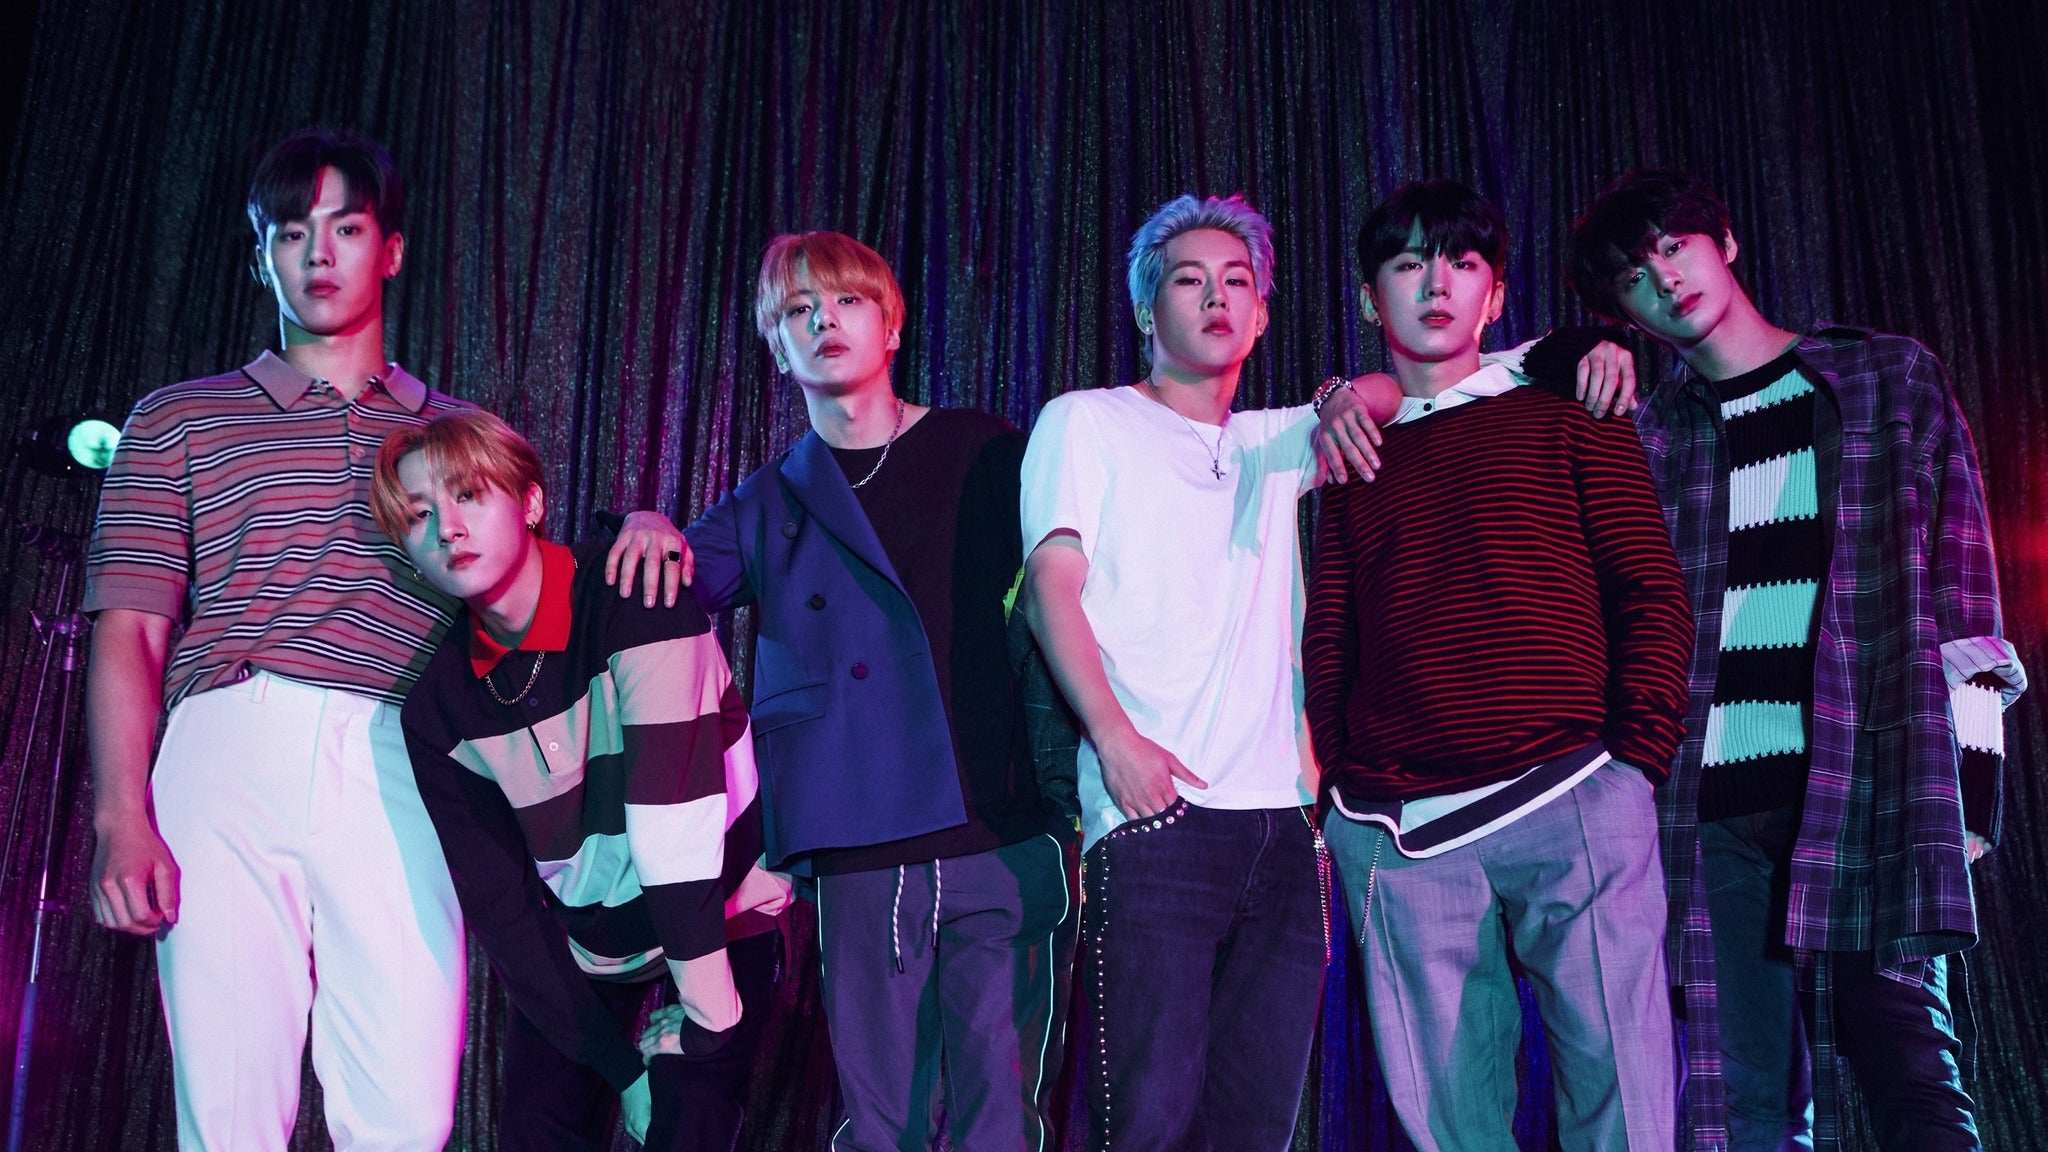 K-pop band Monsta X are ready to make new music again following contract talks with their label. Photo: Starship Entertainment